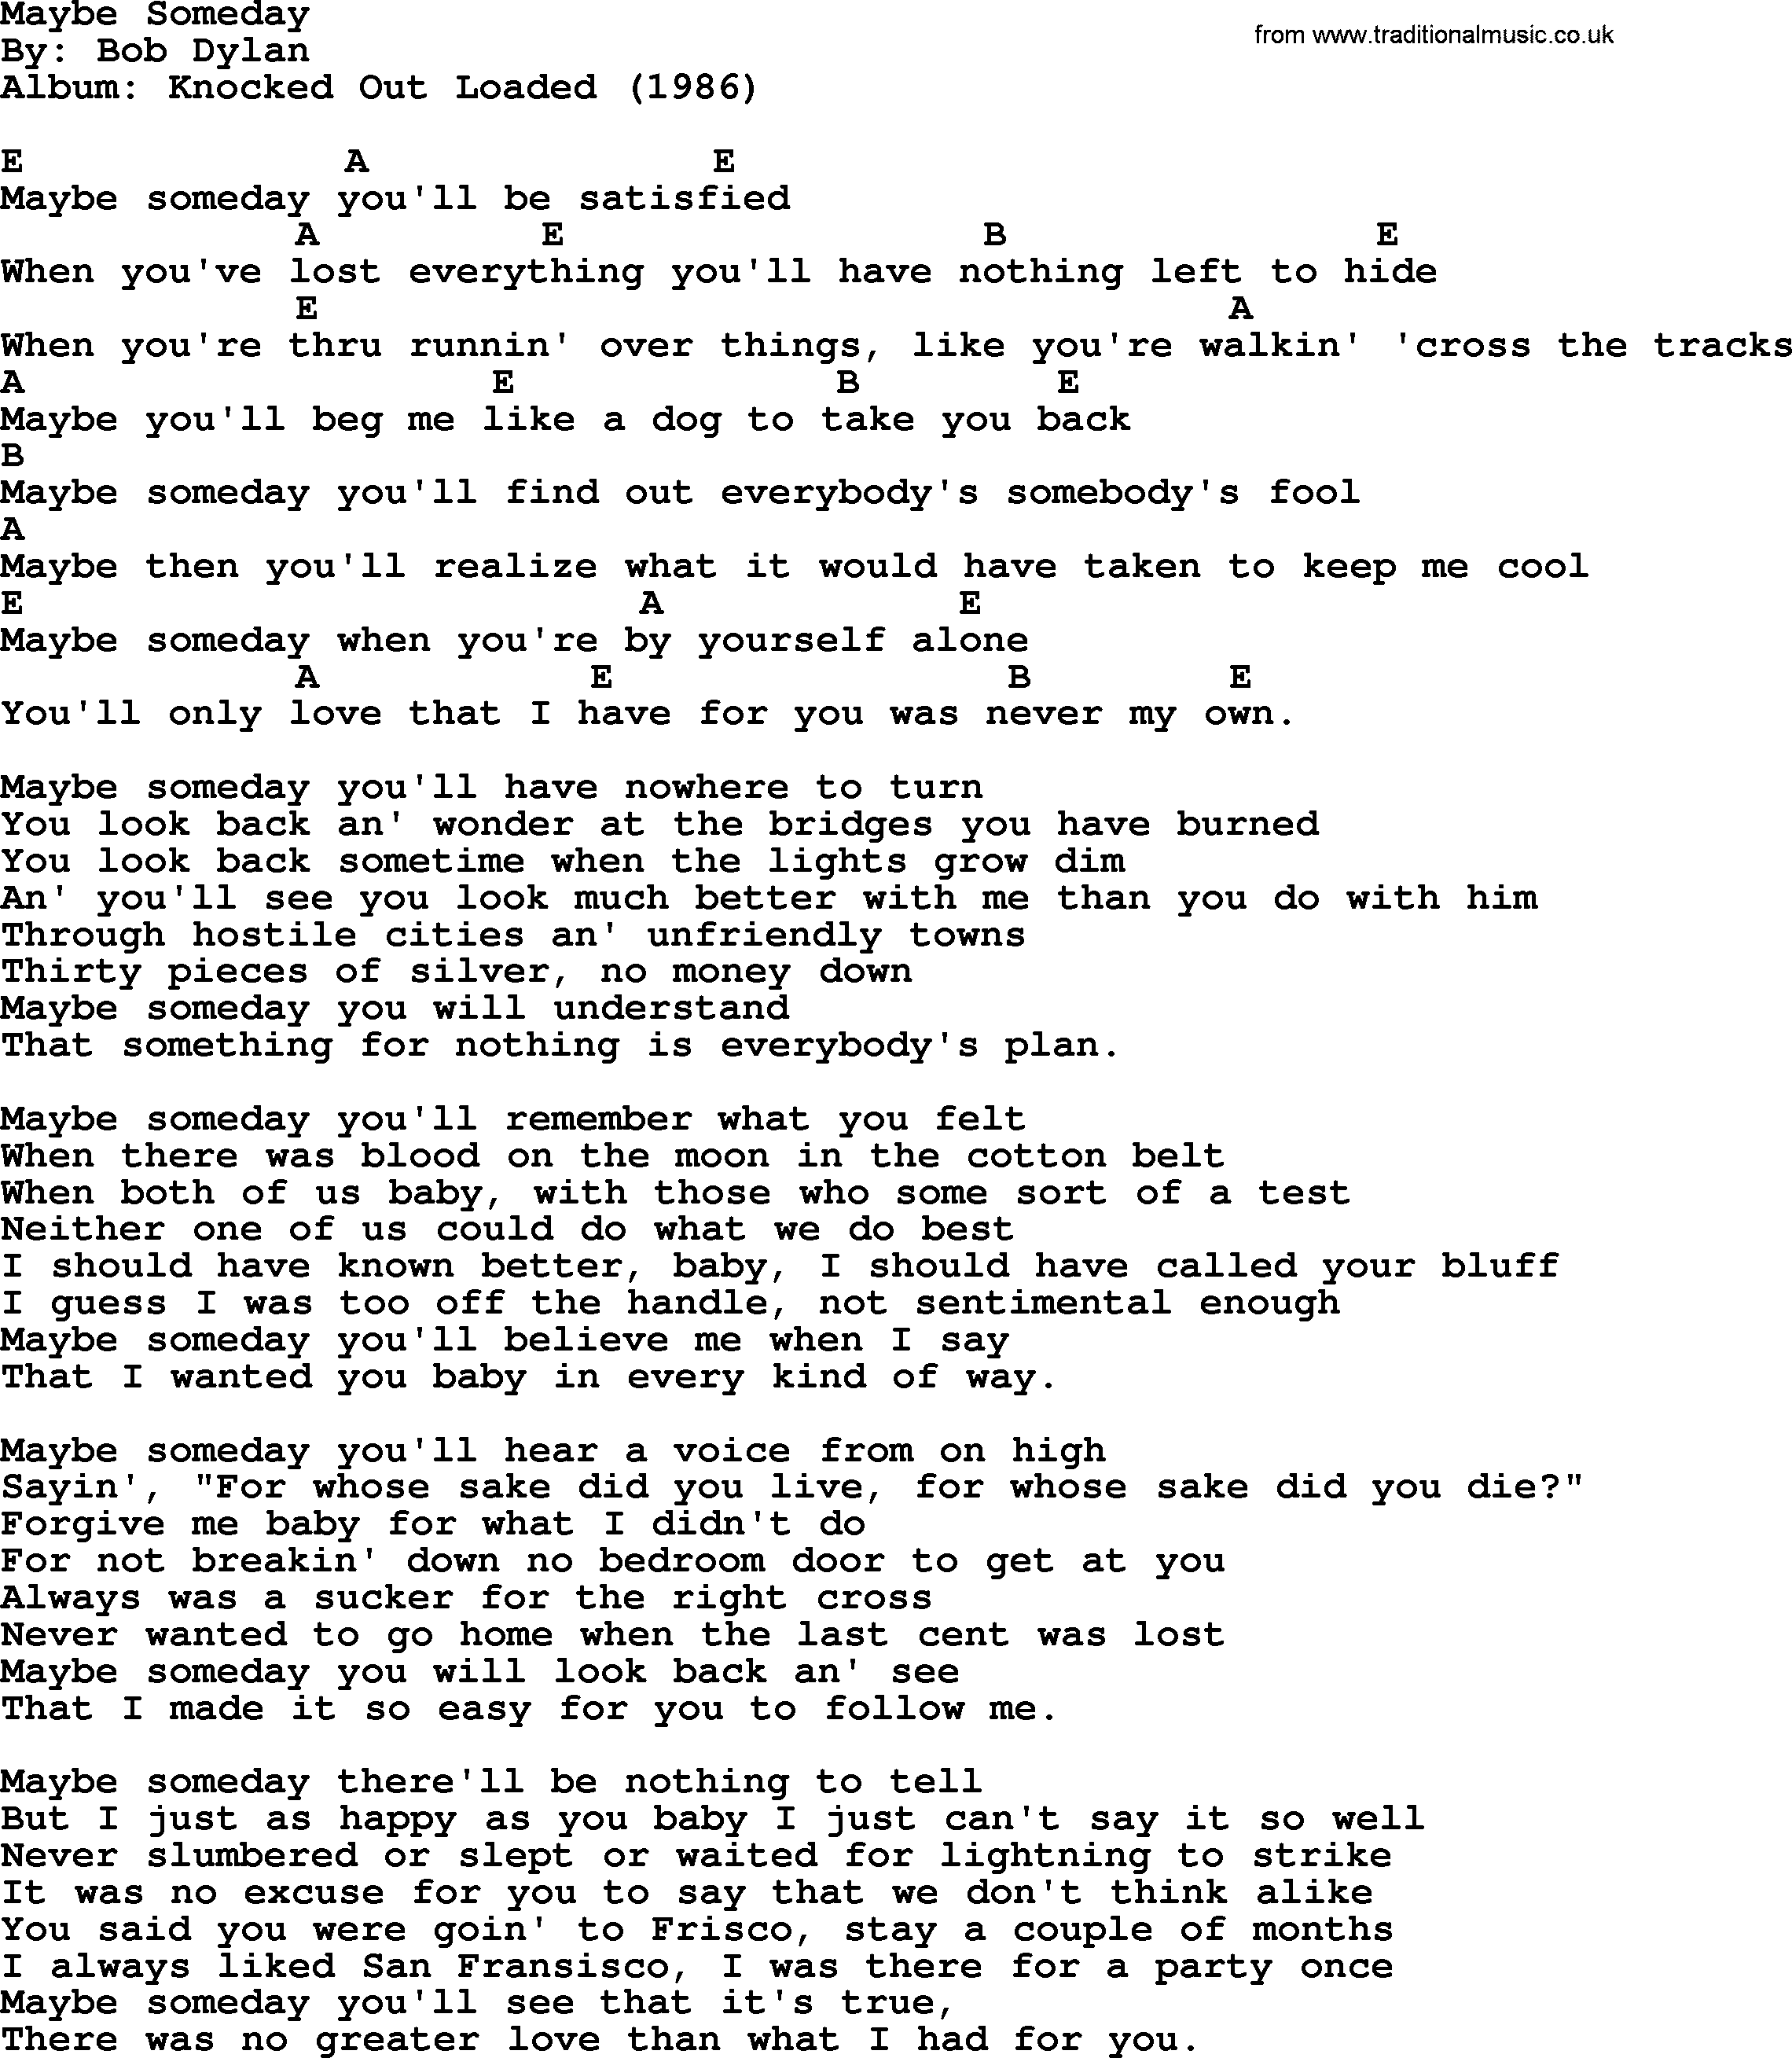 Bob Dylan song, lyrics with chords - Maybe Someday